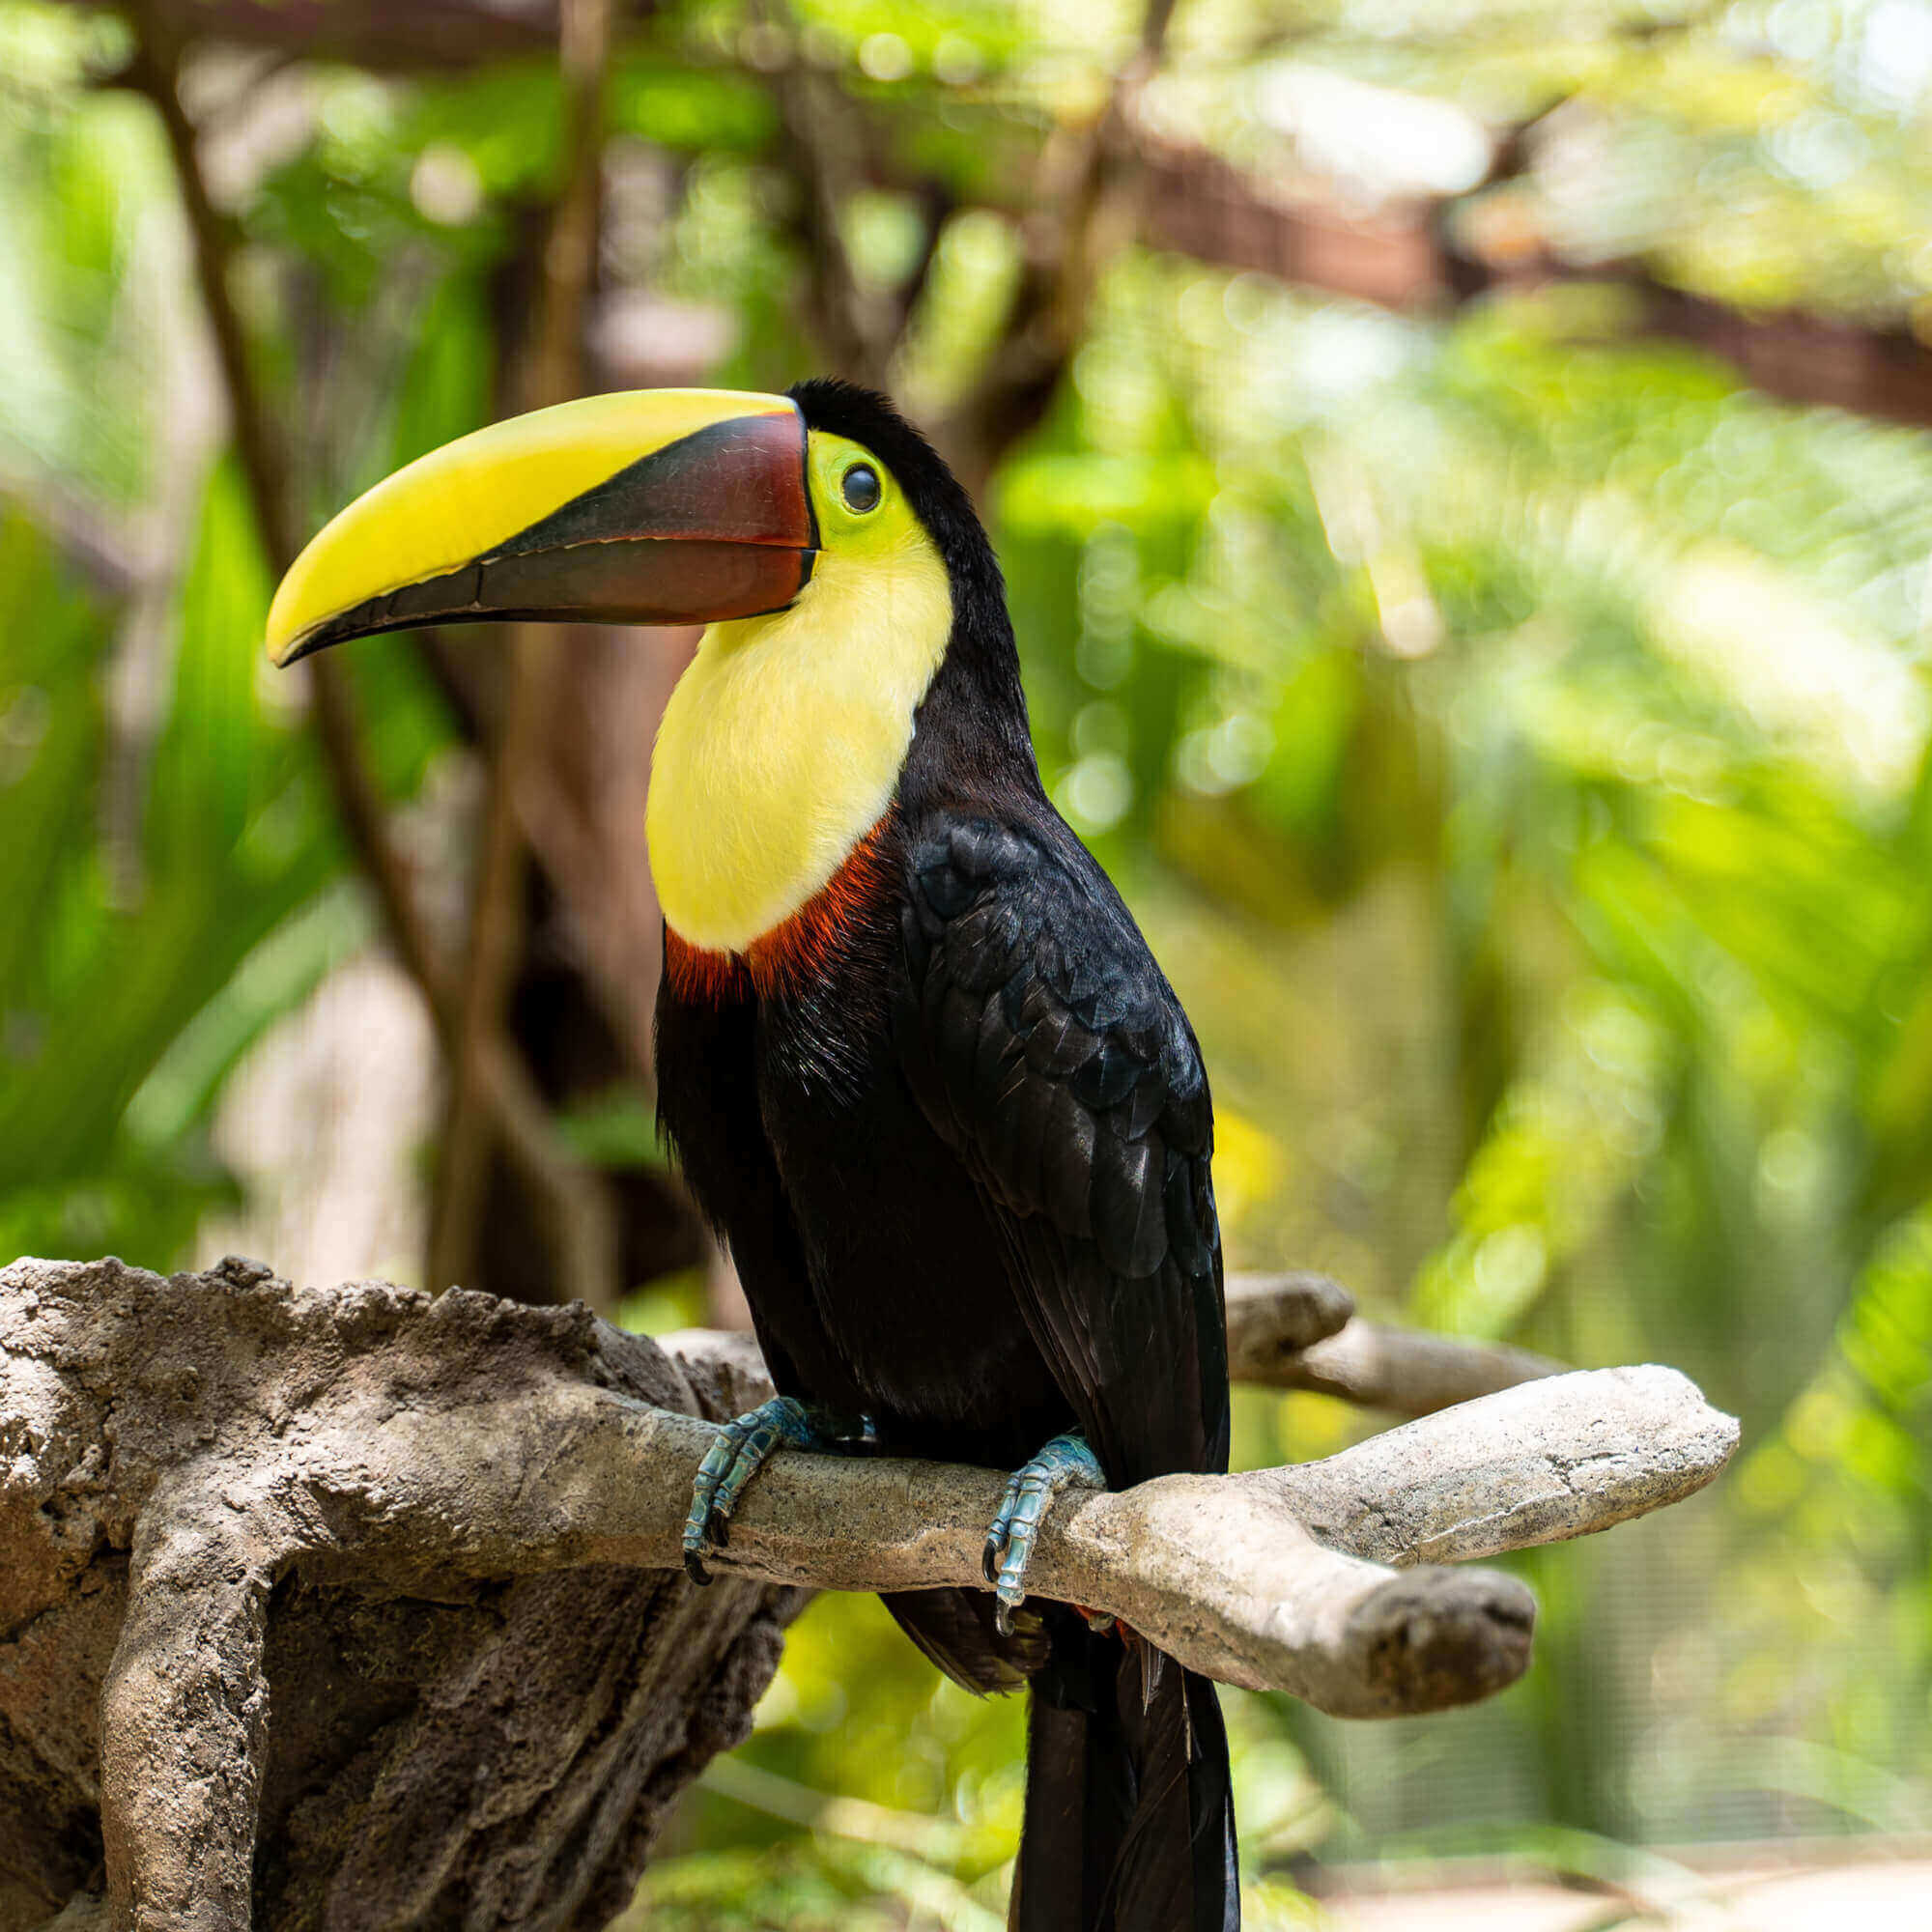 Black and yellow bird in the rainforest